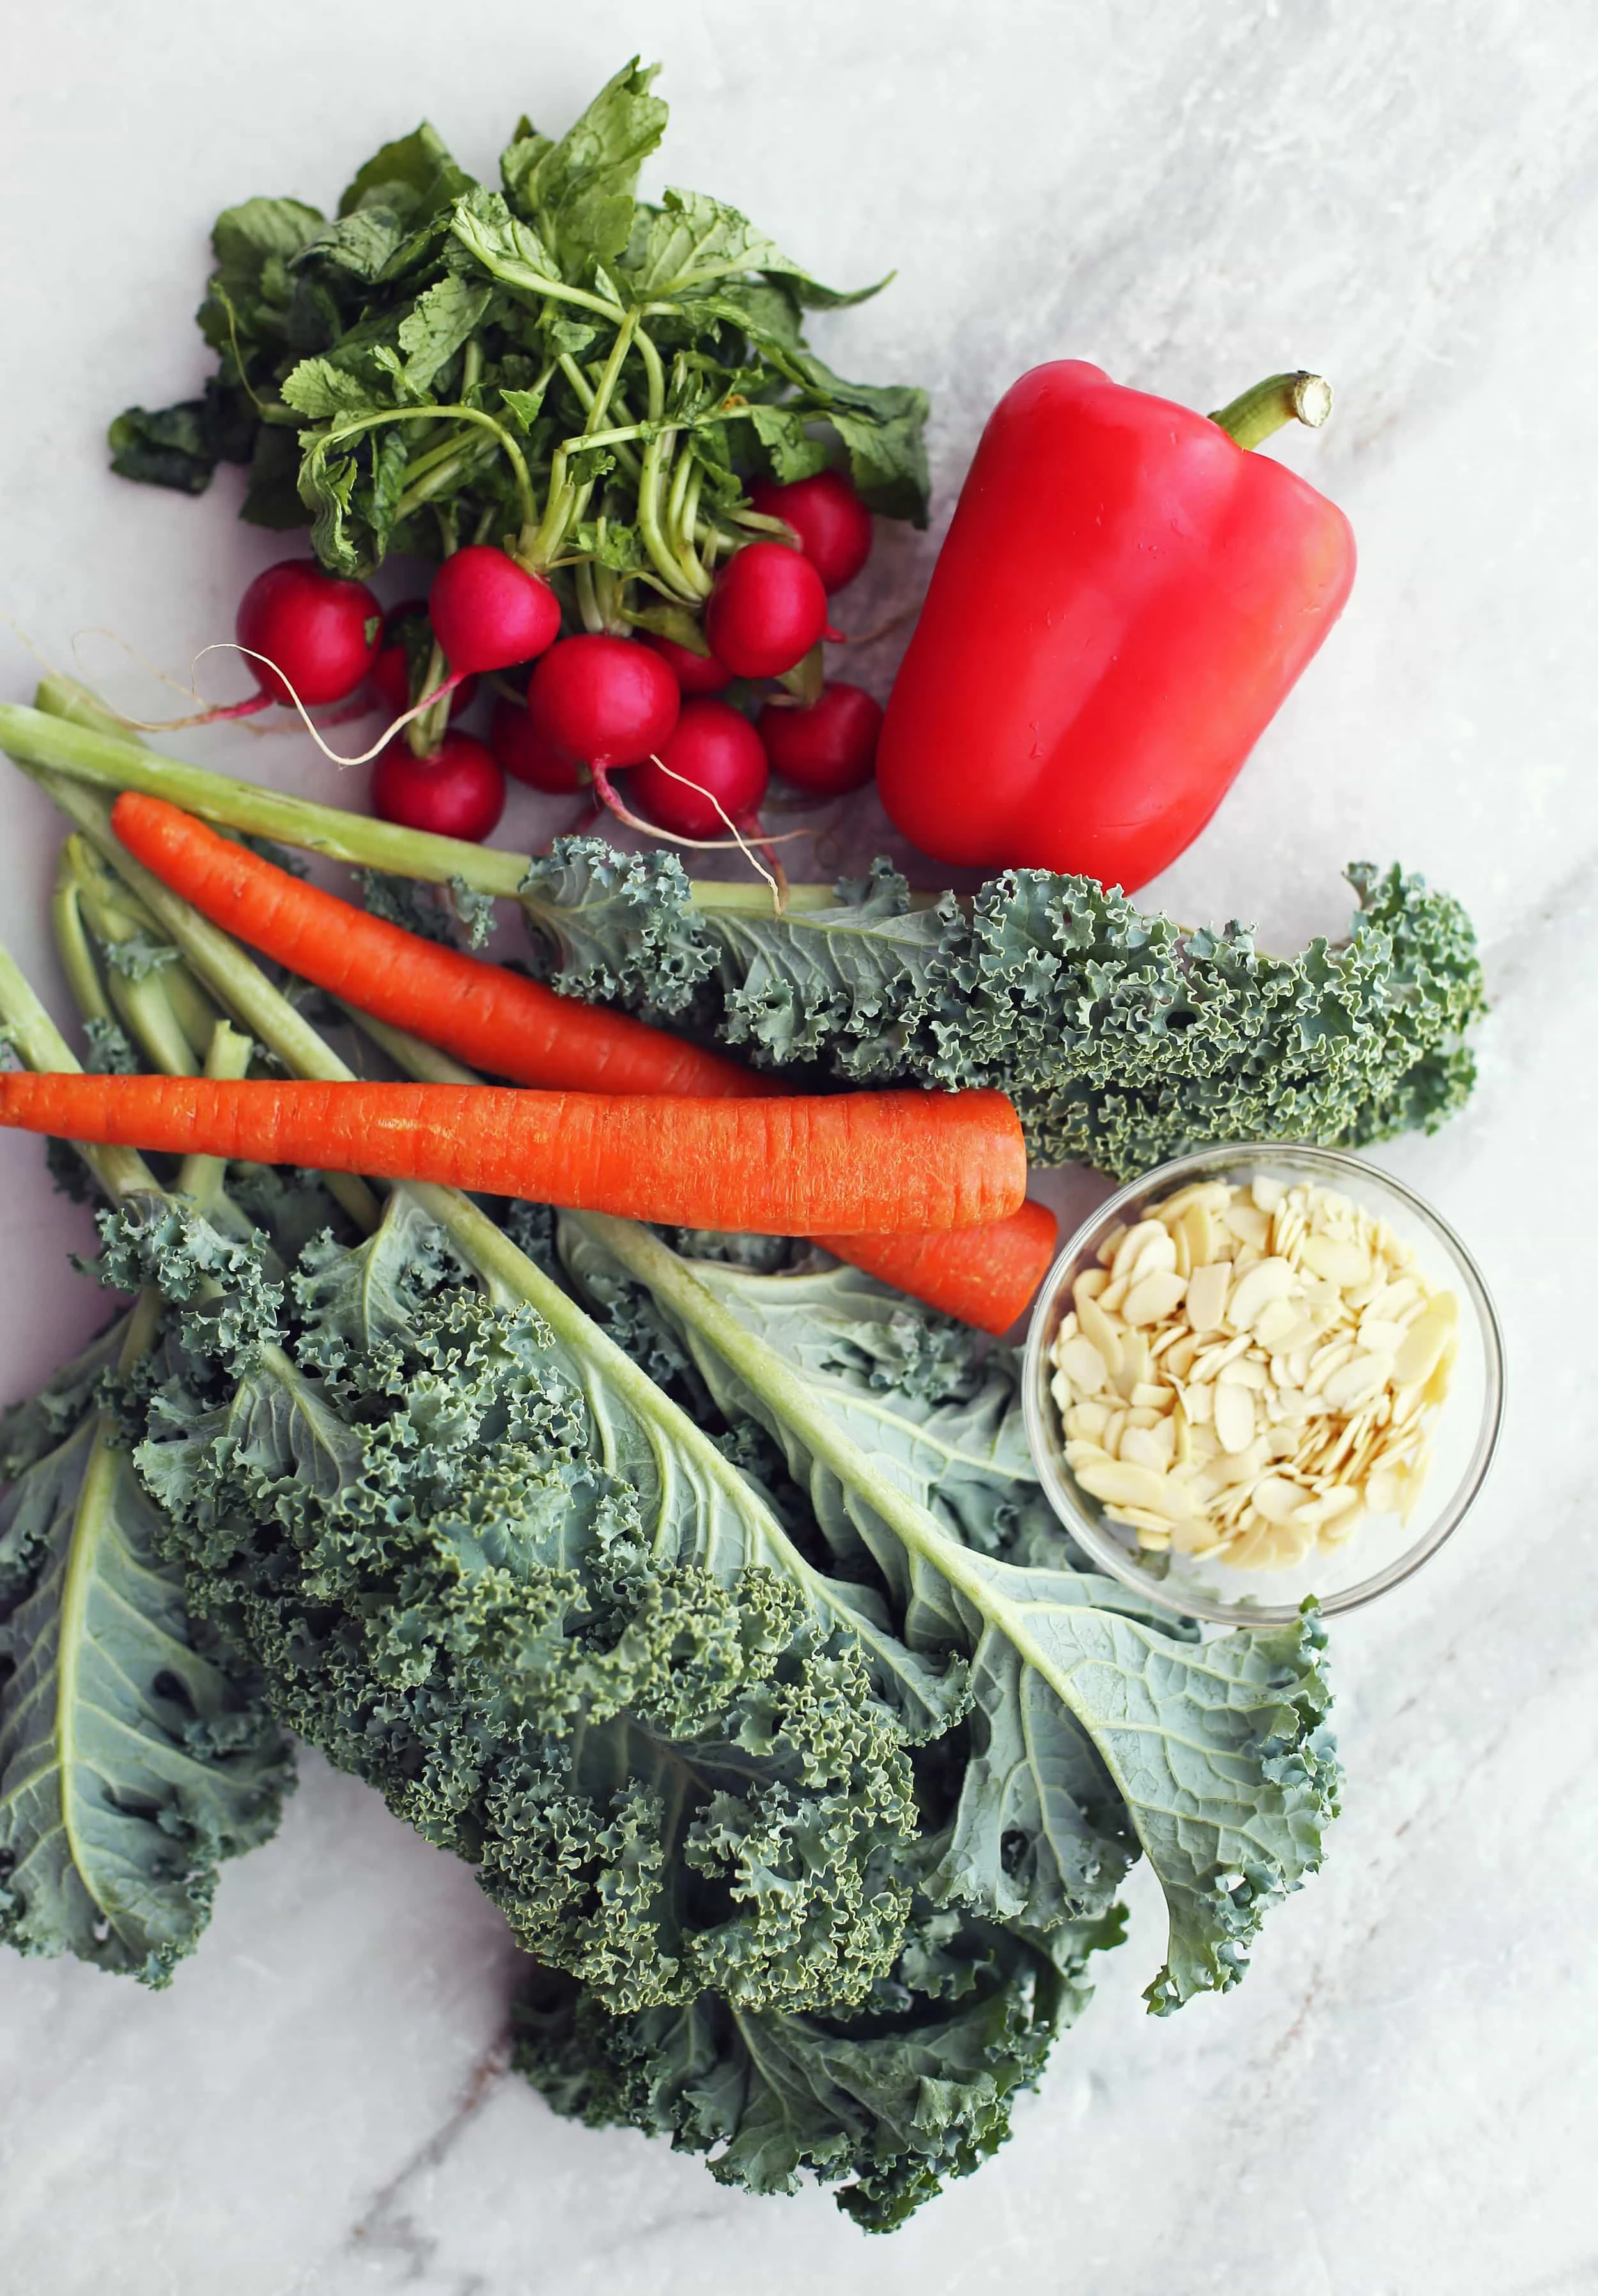 Fresh curly kale, carrots, radishes, a red bell pepper pepper and a bowl of sliced almond.